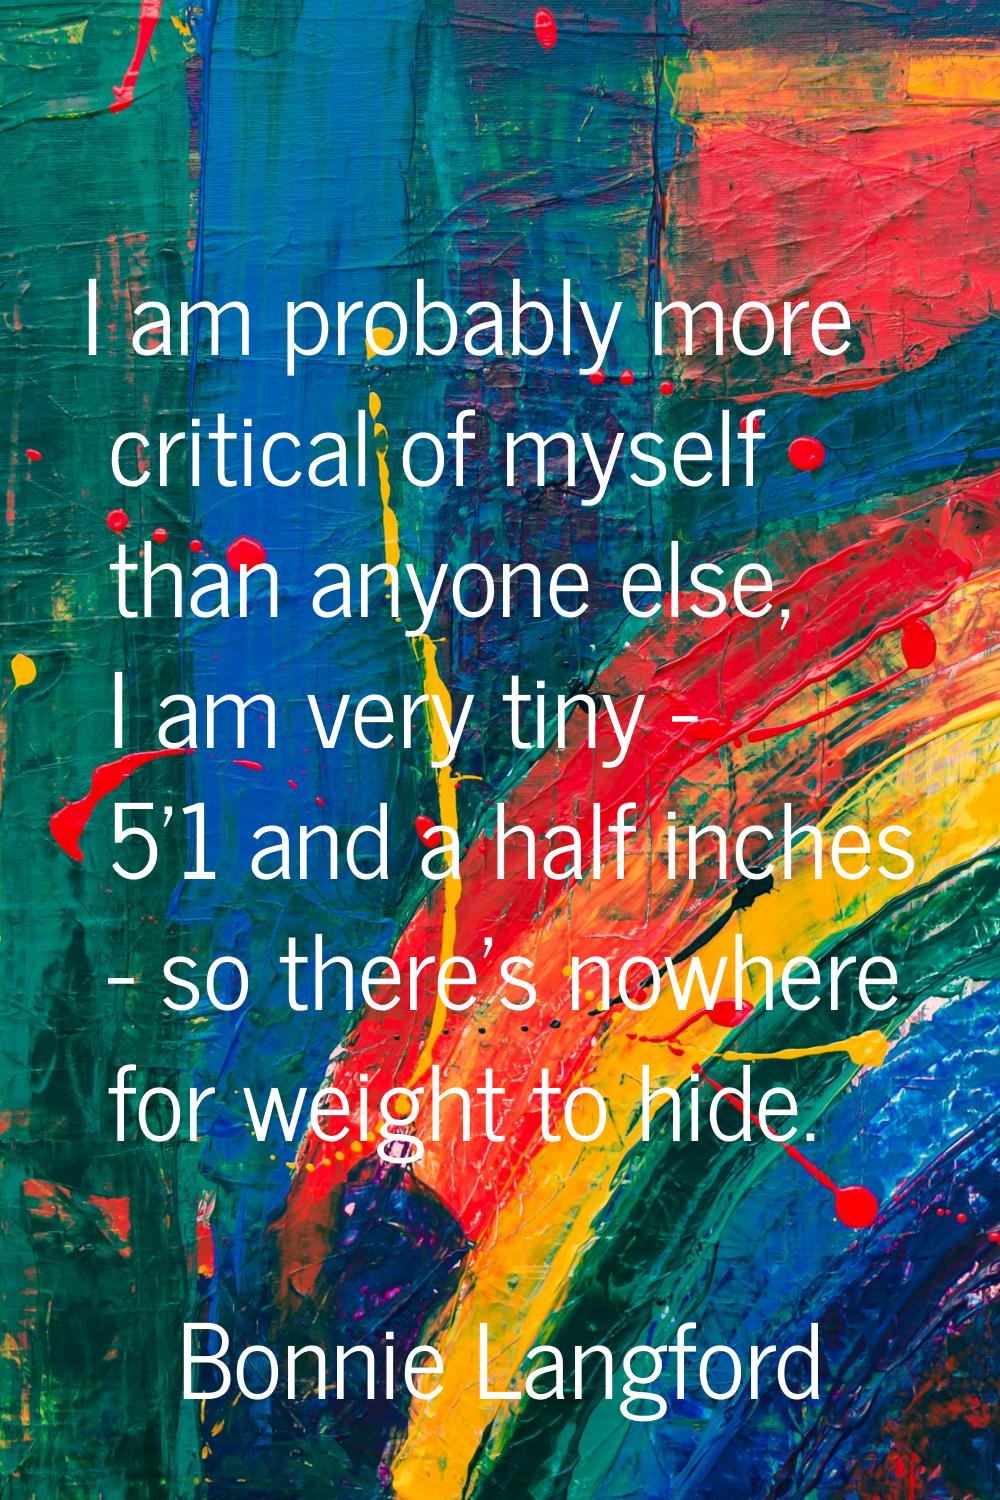 I am probably more critical of myself than anyone else, I am very tiny - 5'1 and a half inches - so